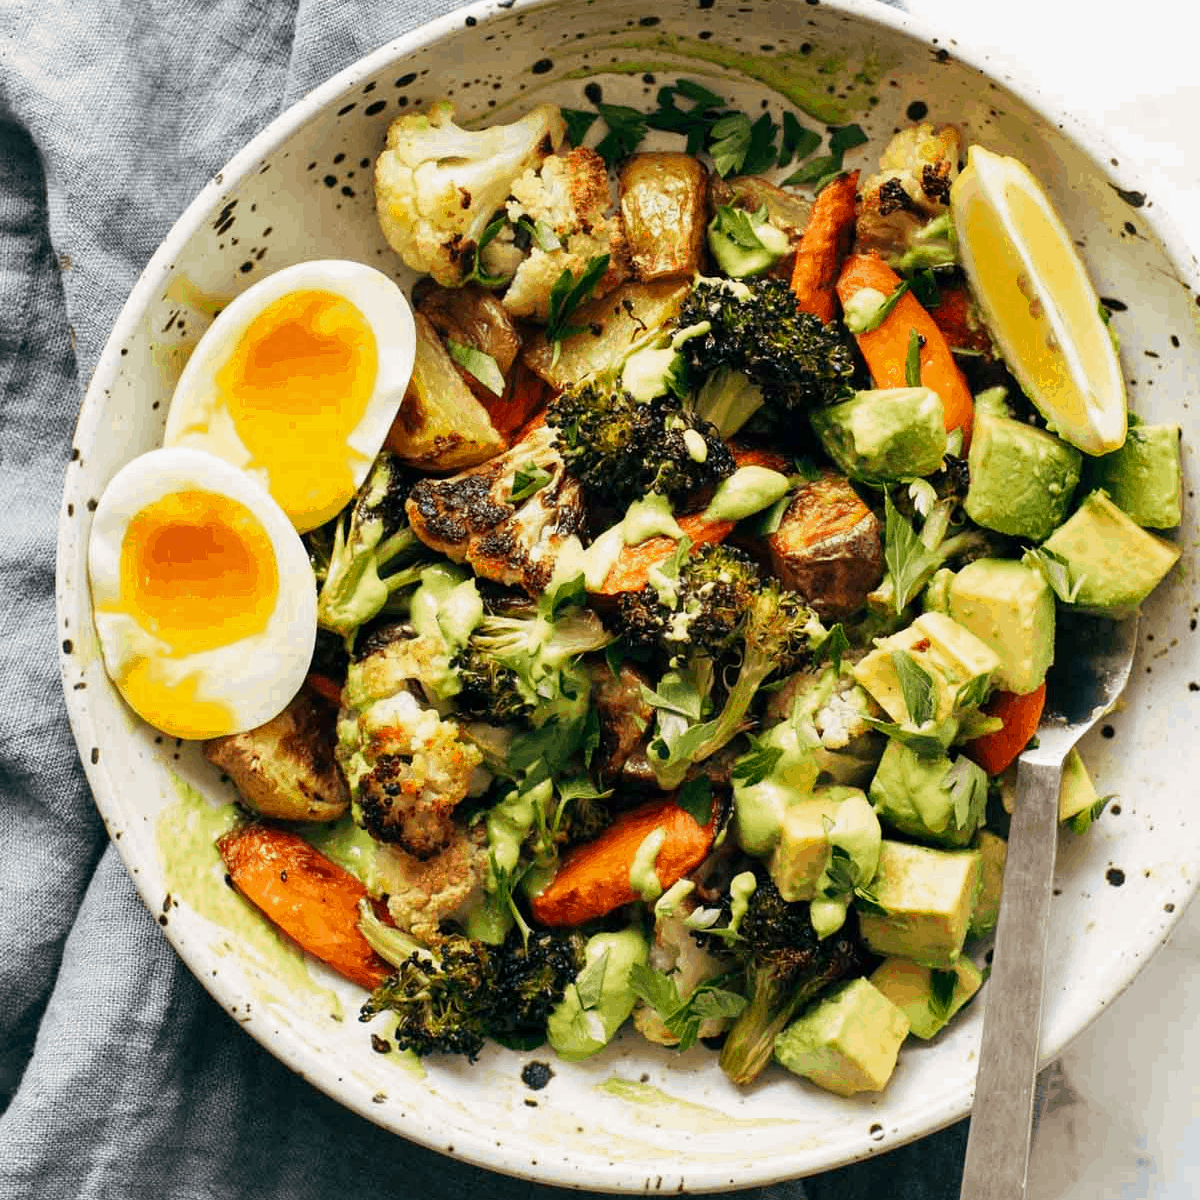 Roasted veggies with avocado, a soft boiled egg on the side, and fresh lemon slices.